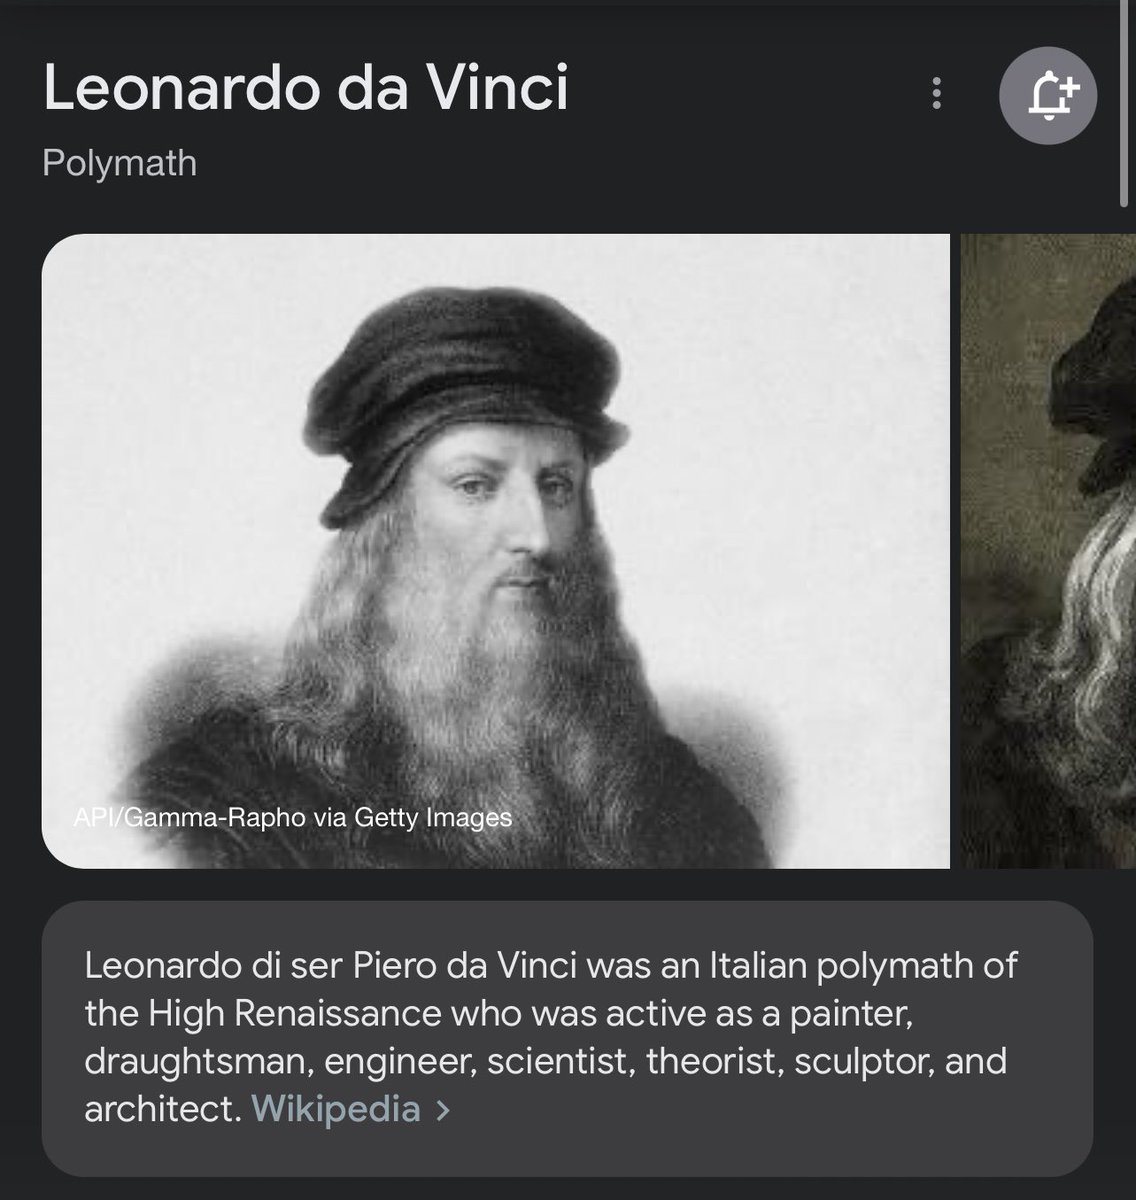 mona lisa is a NEPO. she’s only famous because her dad is leonardo davinci